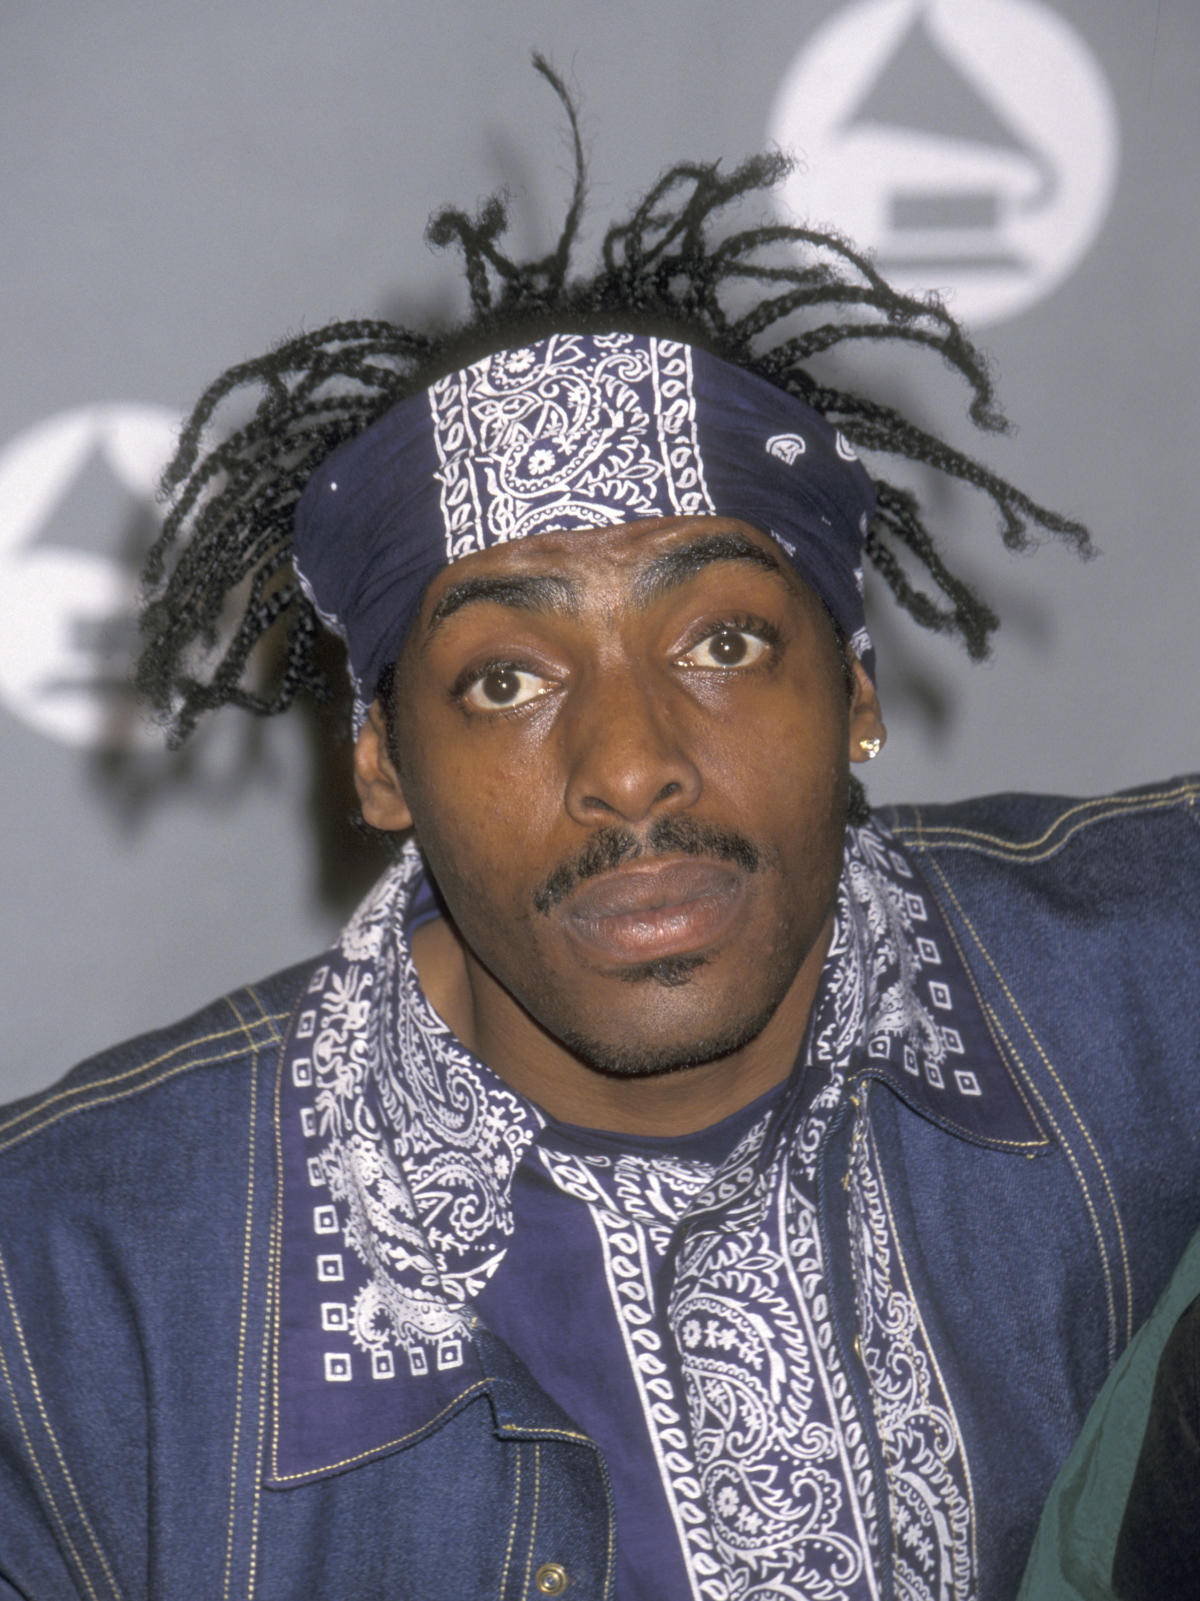 American rapper Coolio, best known for single 'Gangsta's Paradise